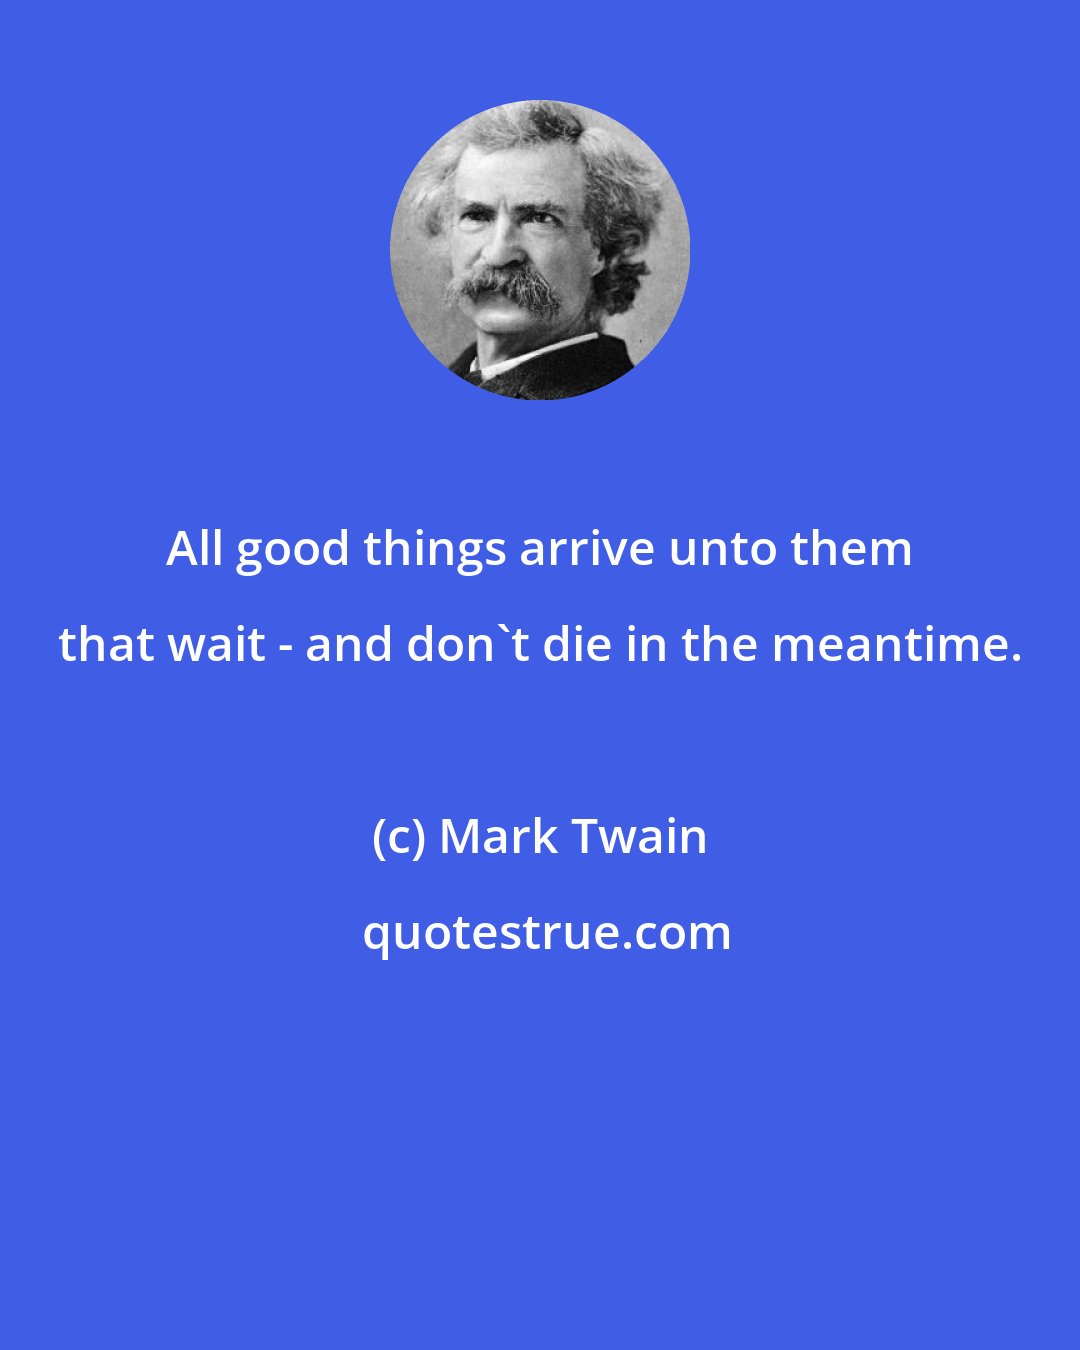 Mark Twain: All good things arrive unto them that wait - and don't die in the meantime.